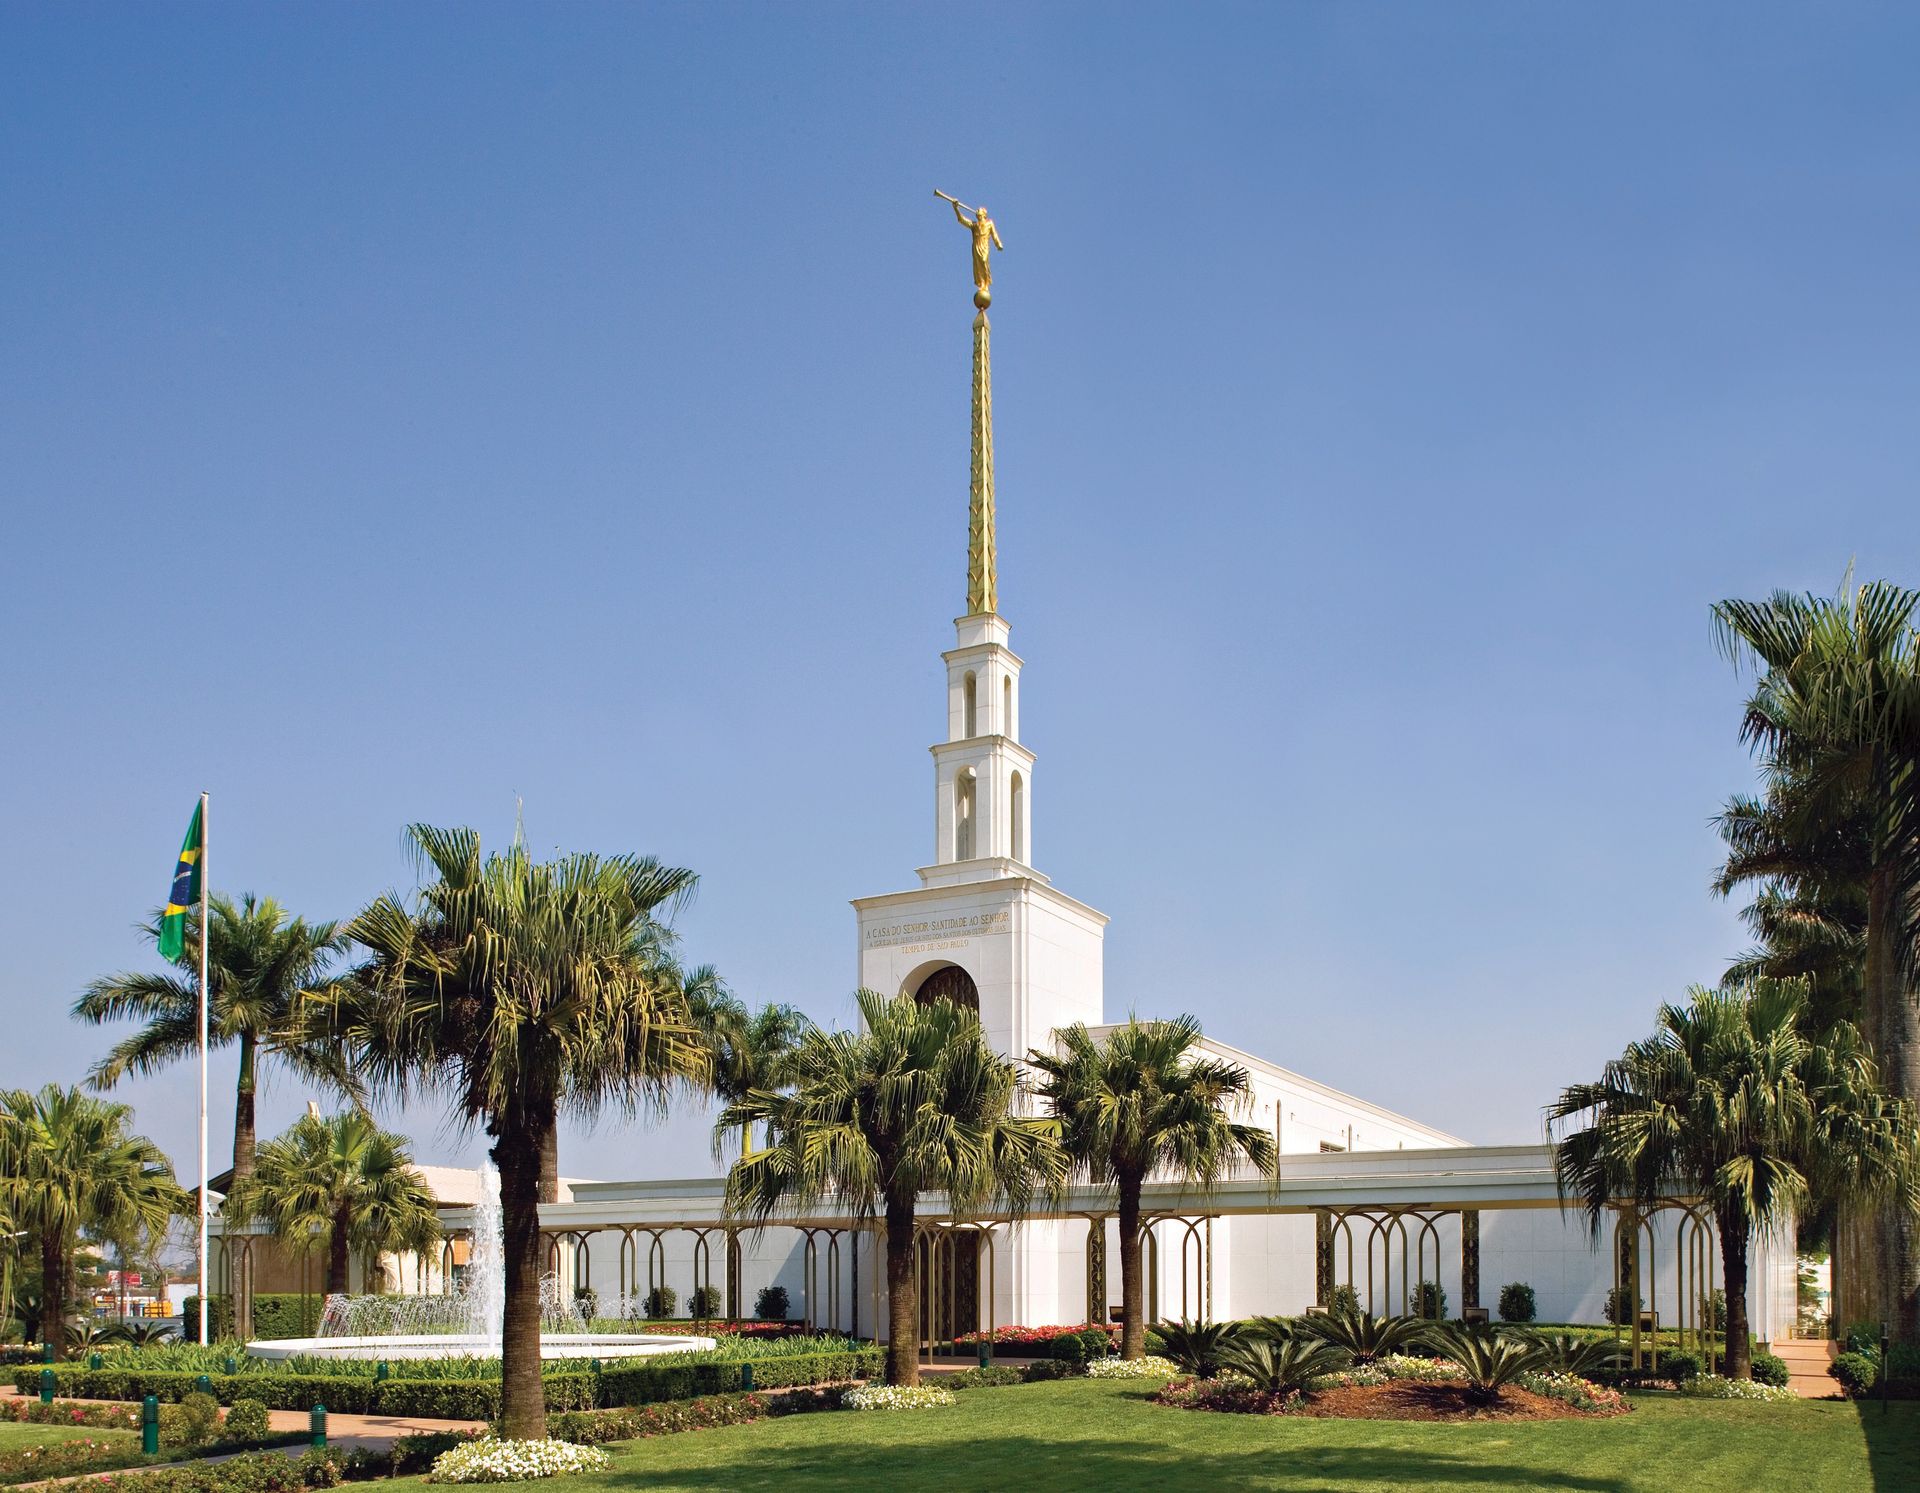 The entire São Paulo Brazil Temple, including the entrance and scenery.